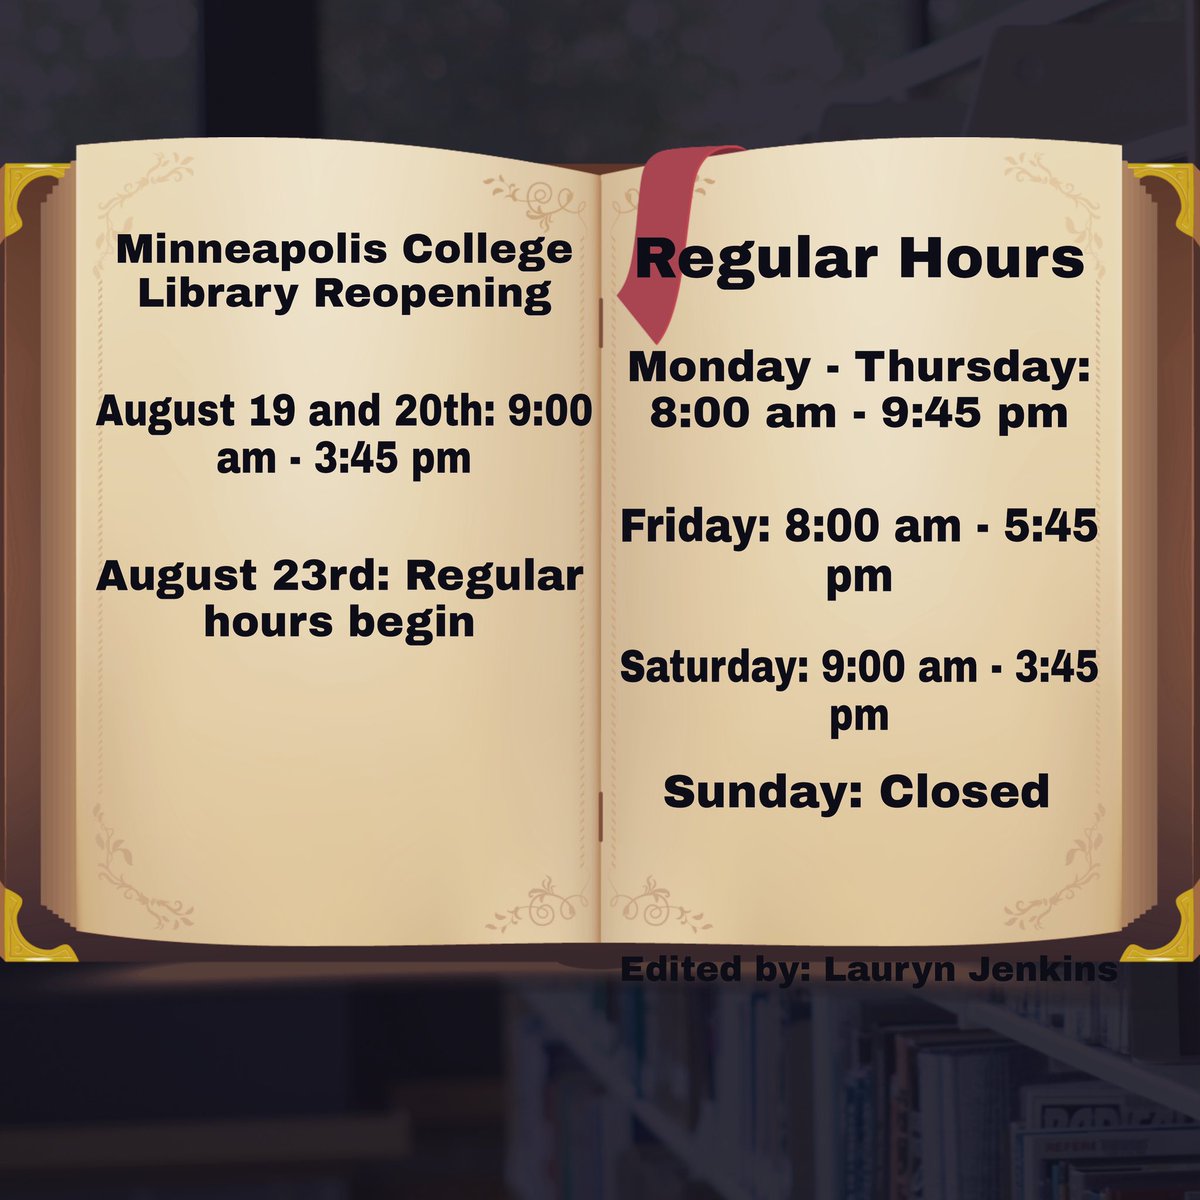 Today’s the day - the Minneapolis College Library has re-opened! We look forward to seeing (the top half of) your faces! #mplscollegelibrary #wereopen  #masksrequired